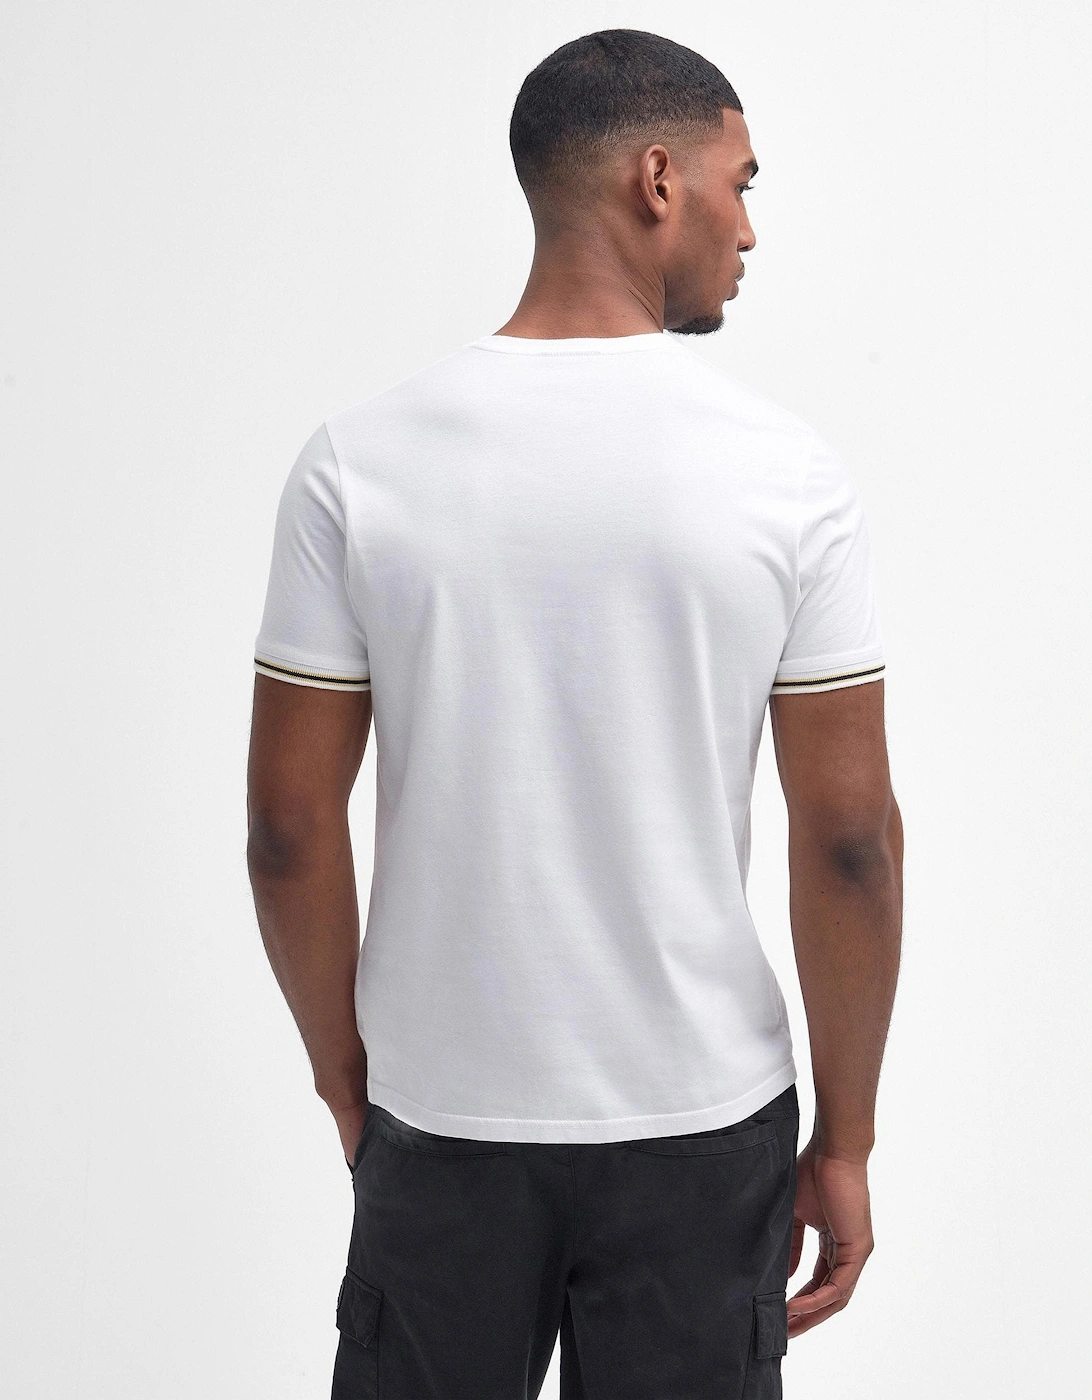 Torque Tipped Mens Tailored T-Shirt